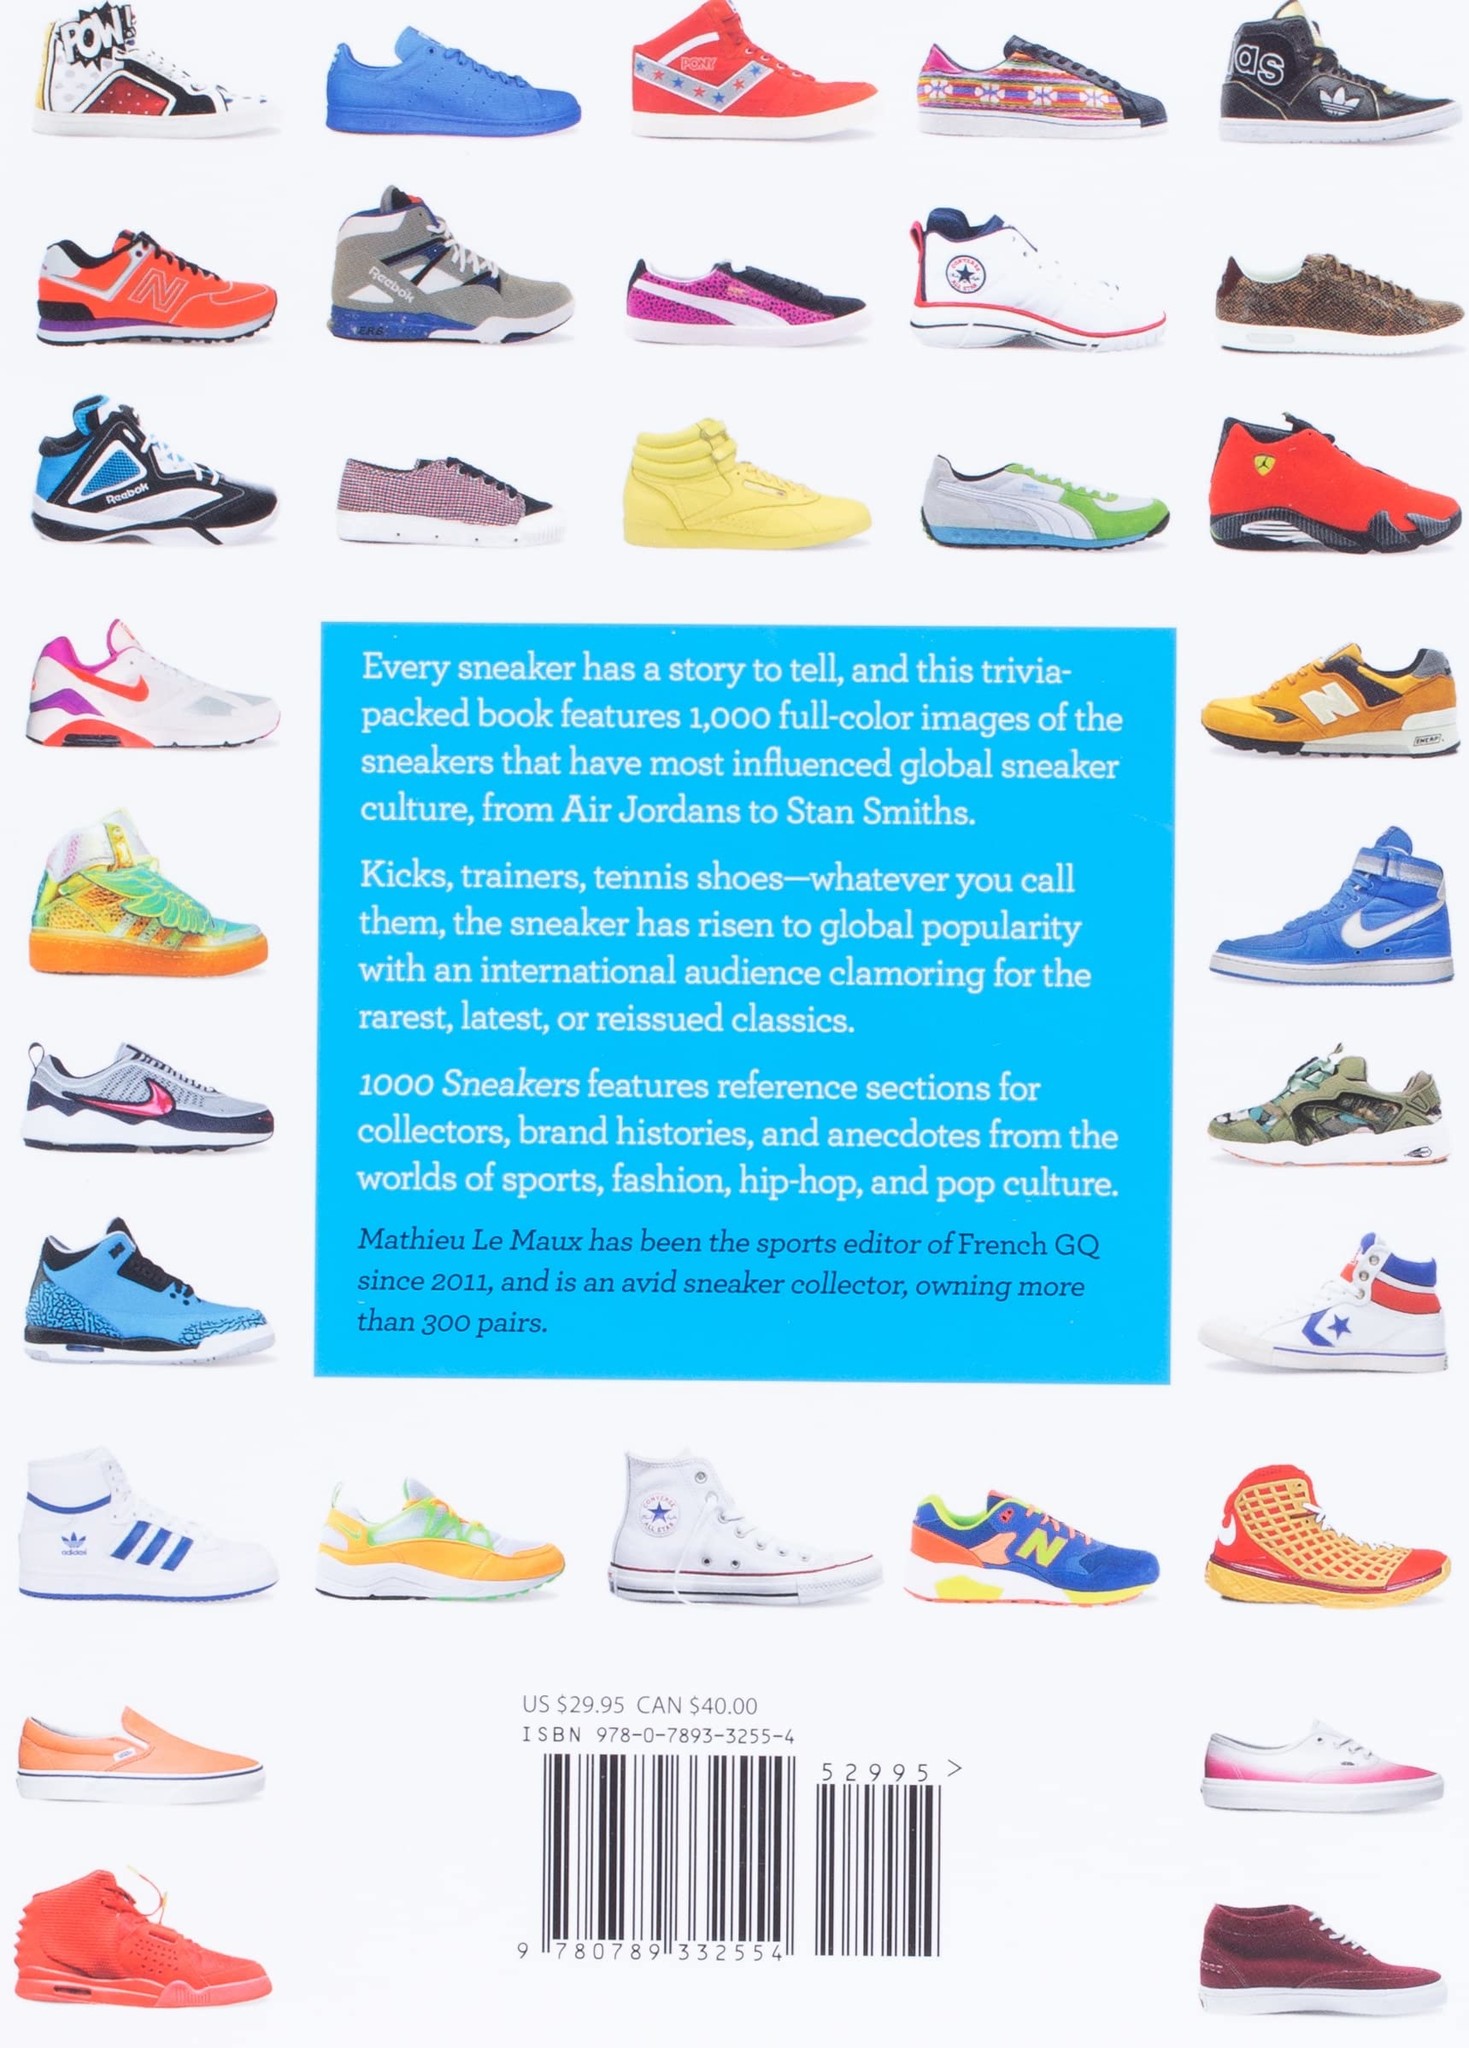 1000 Sneakers: A Guide to the World's Greatest Kicks Book - MODA3